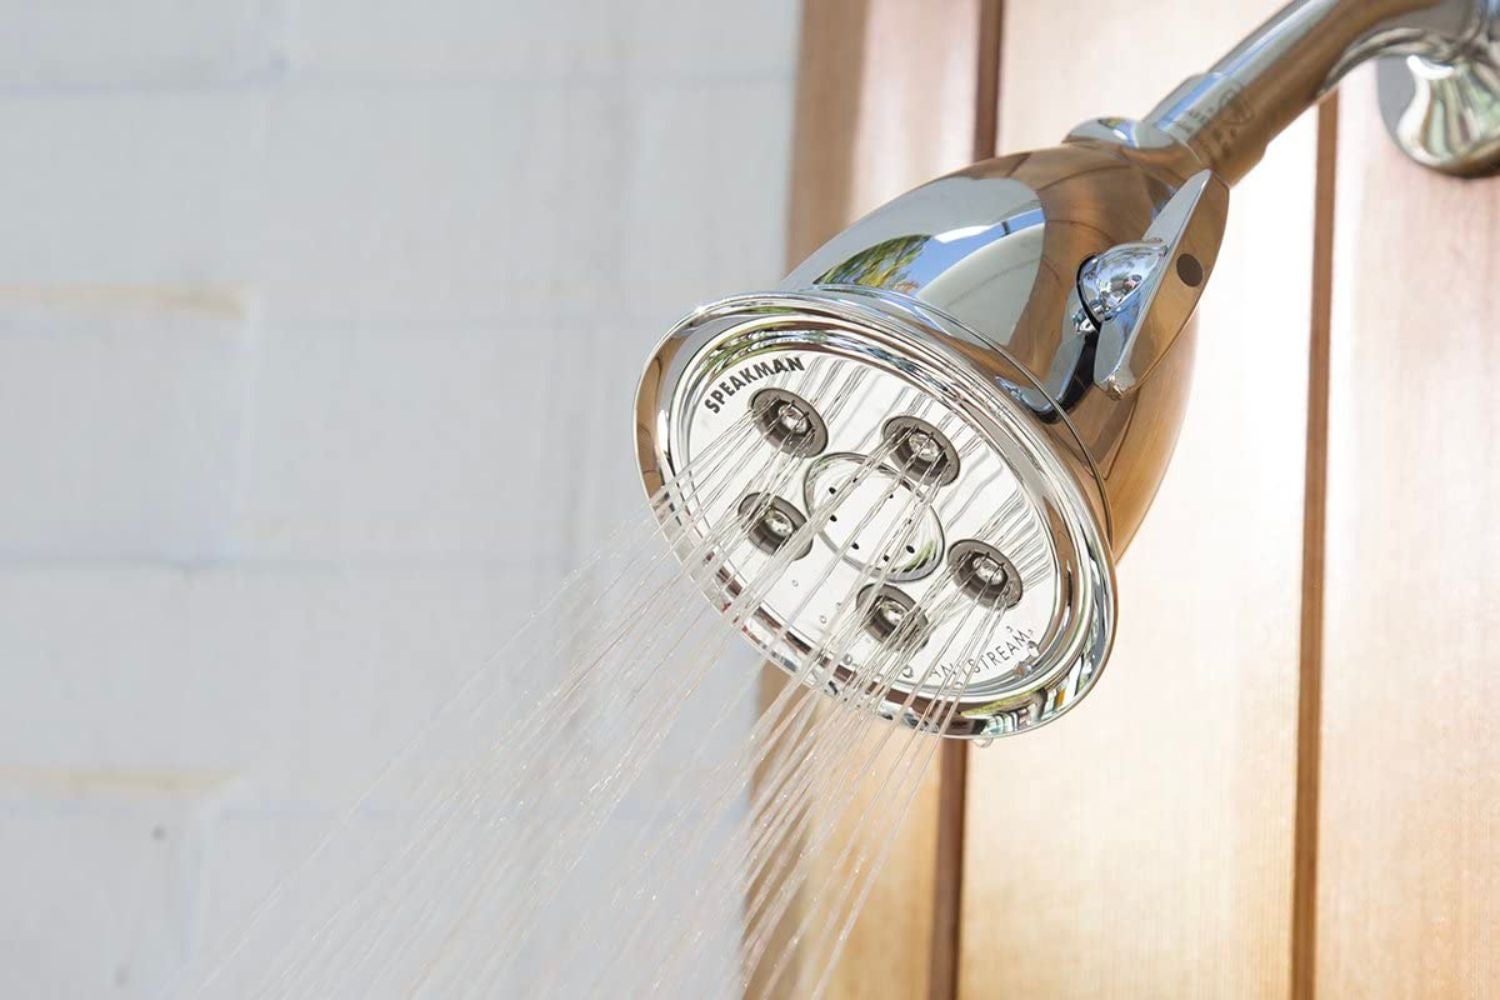 What Showerhead Works Best For Low Water Pressure